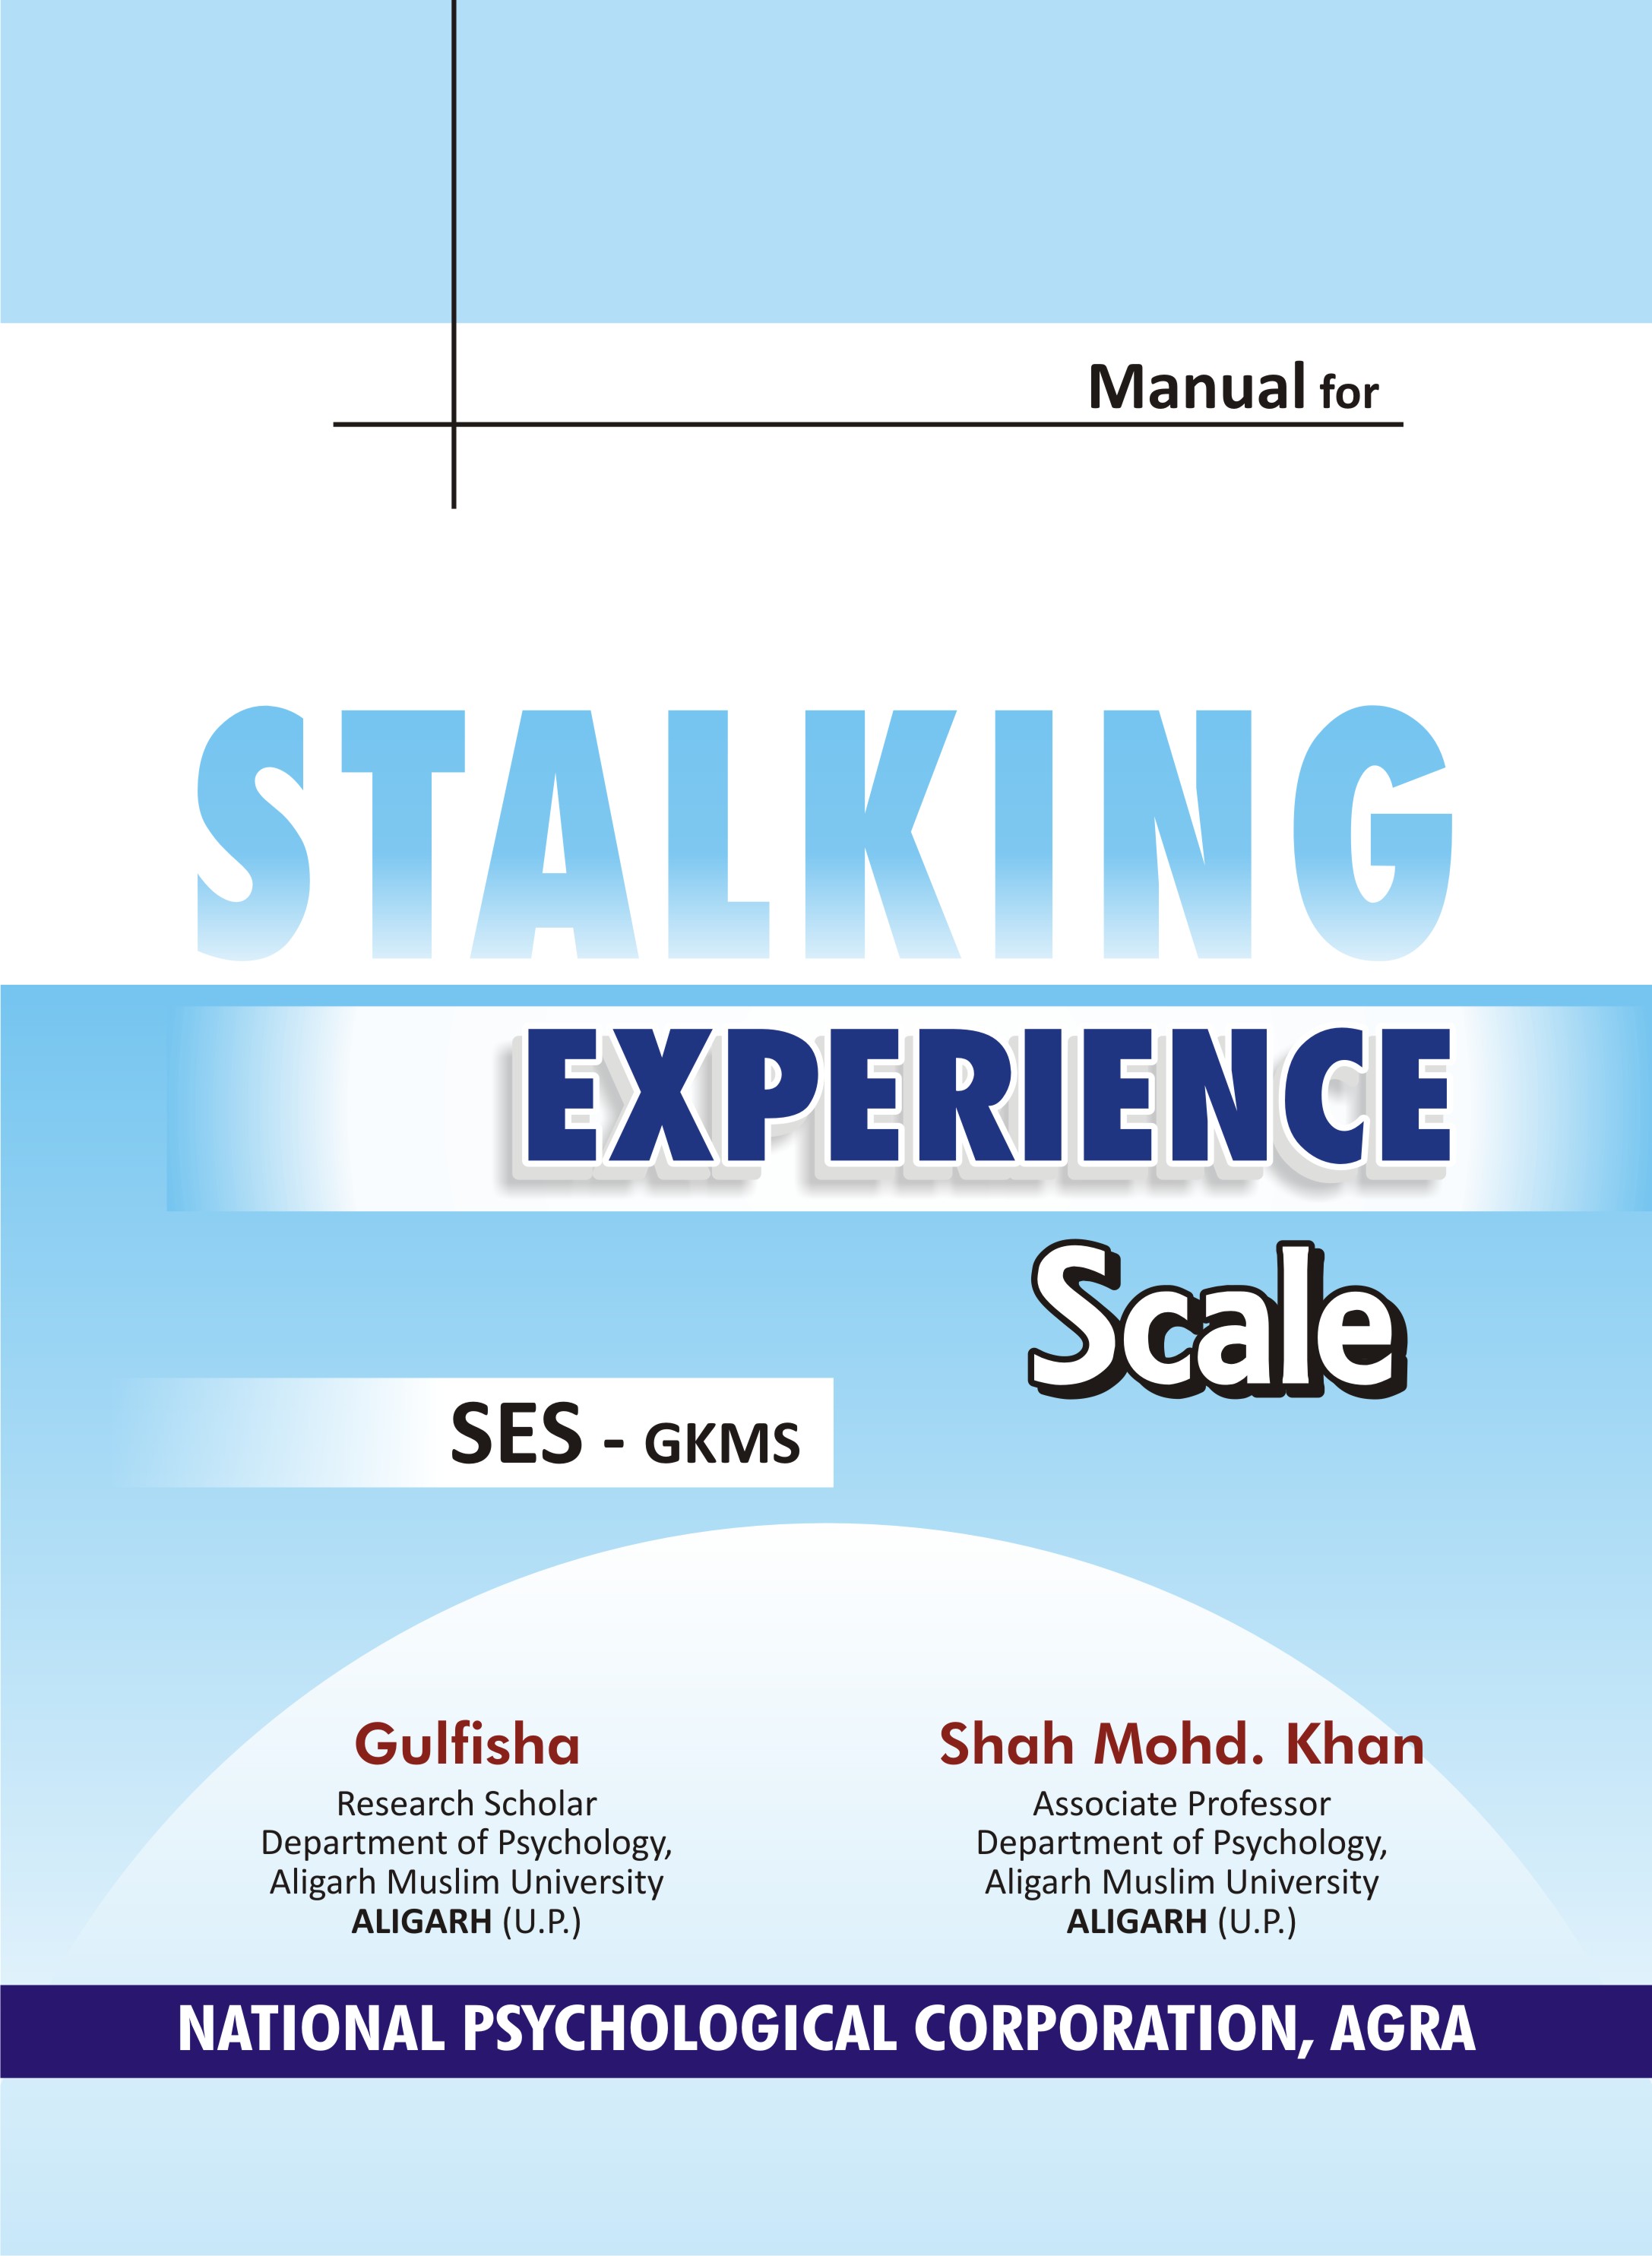 STALKING-EXPERIENCE-SCALE